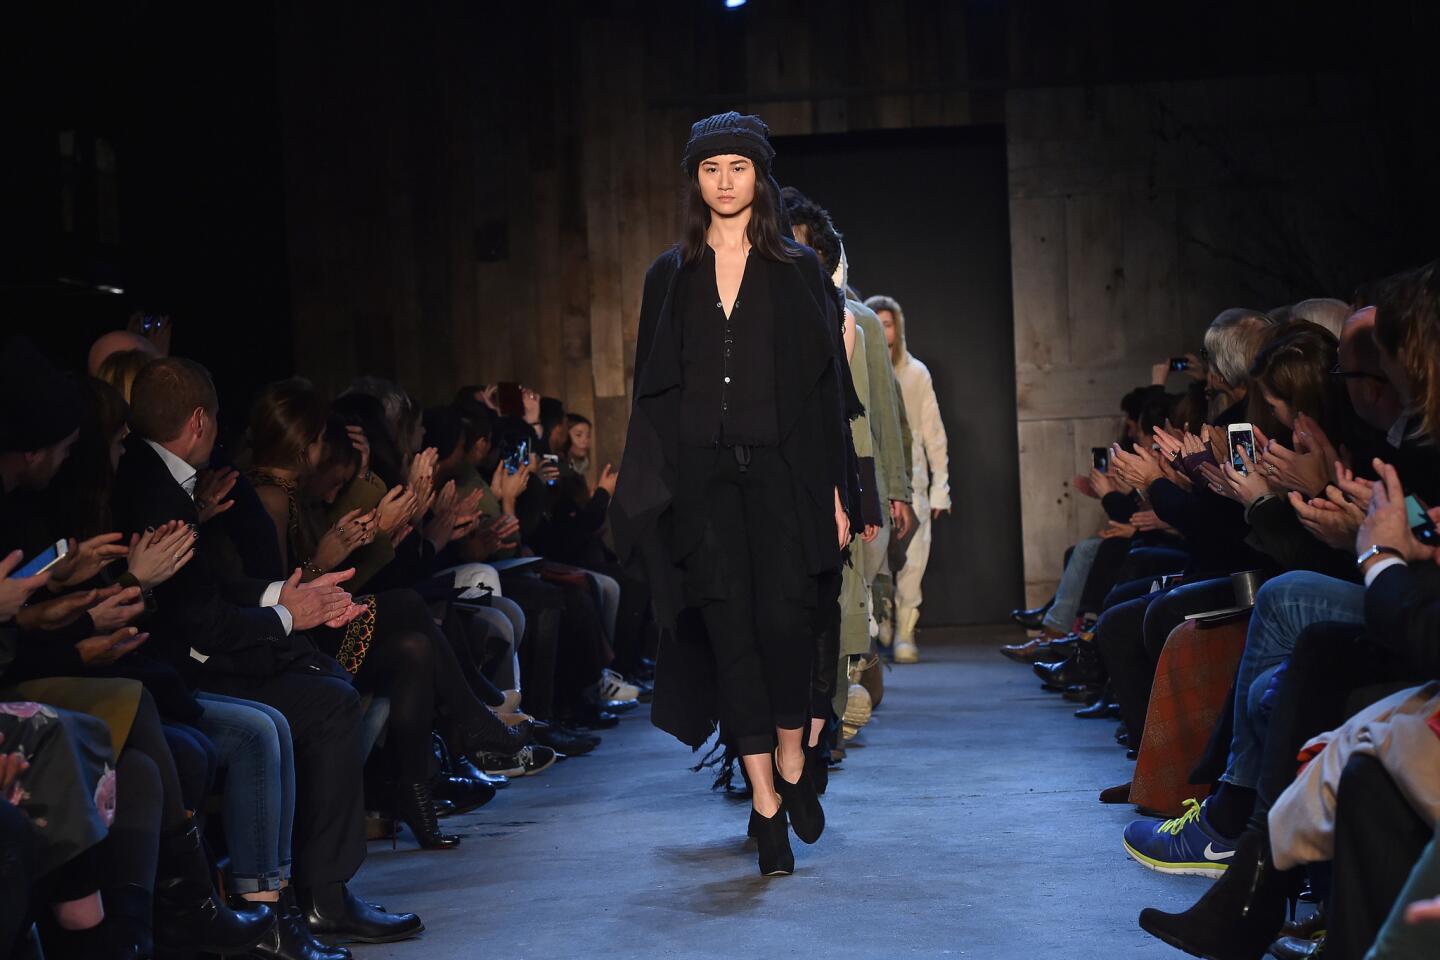 Models walk the runway during the Greg Lauren fashion show at New York Fashion Week. Complete updates from New York Fashion Week 2015 | Celebrities at New York Fashion Week | New York Fashion Week: Street Style